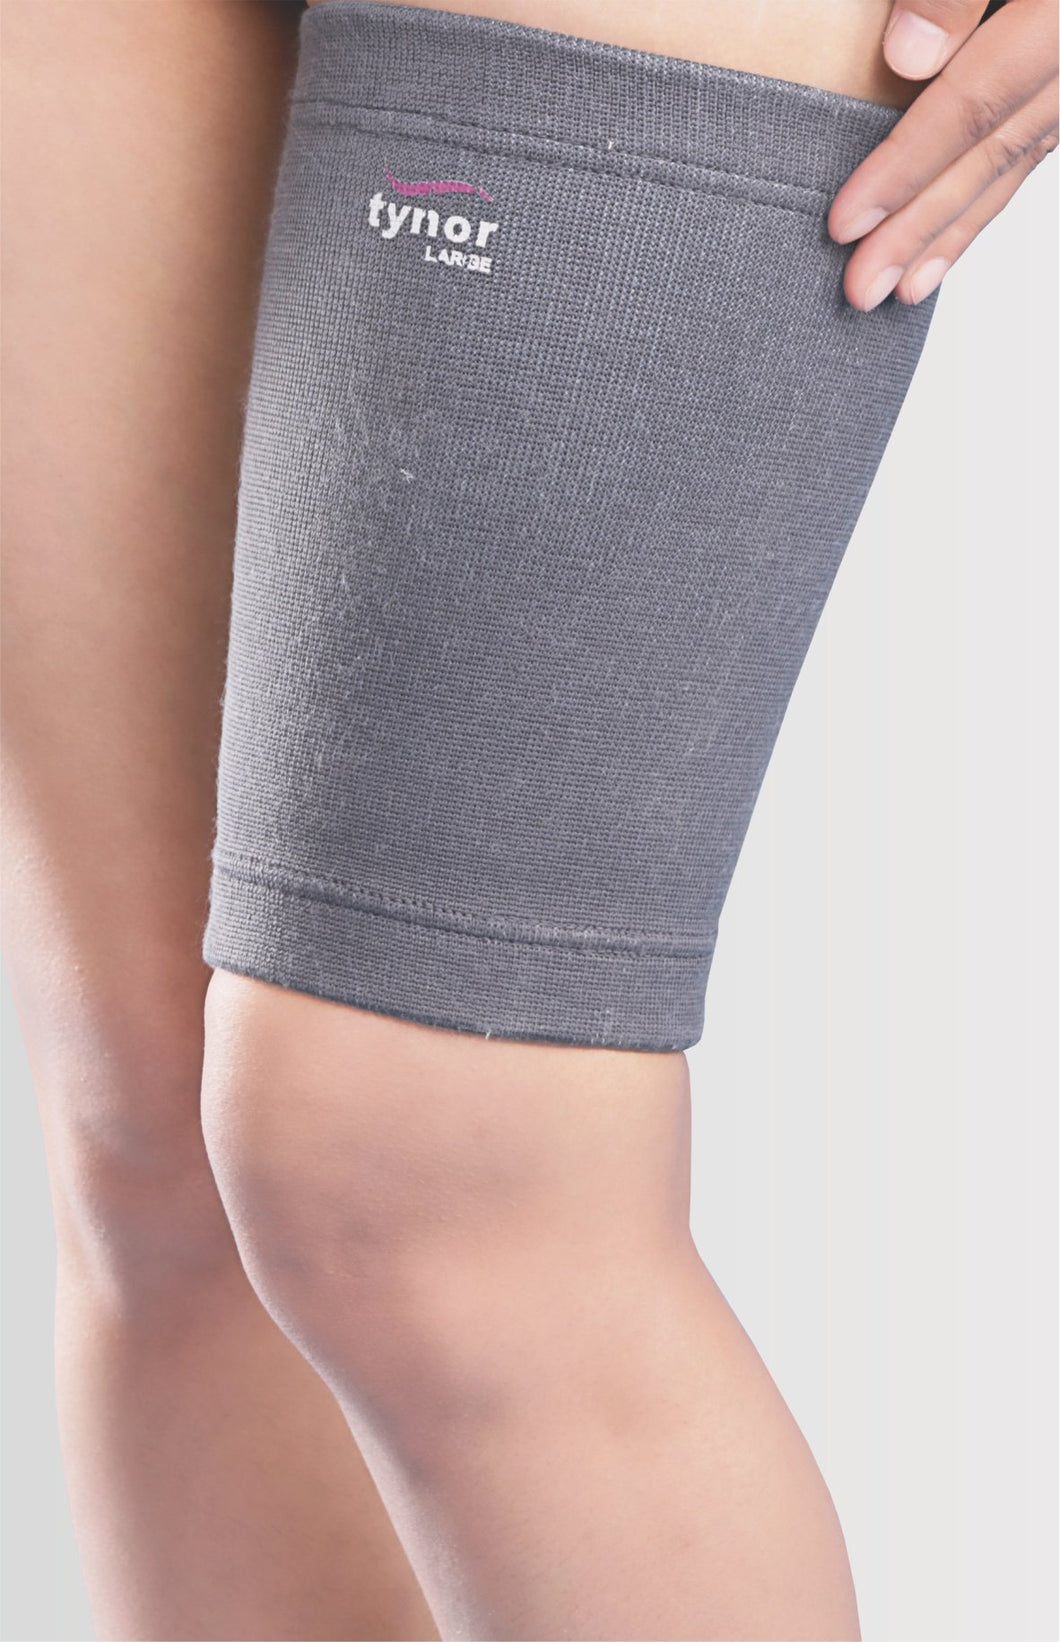 THIGH SUPPORT - M